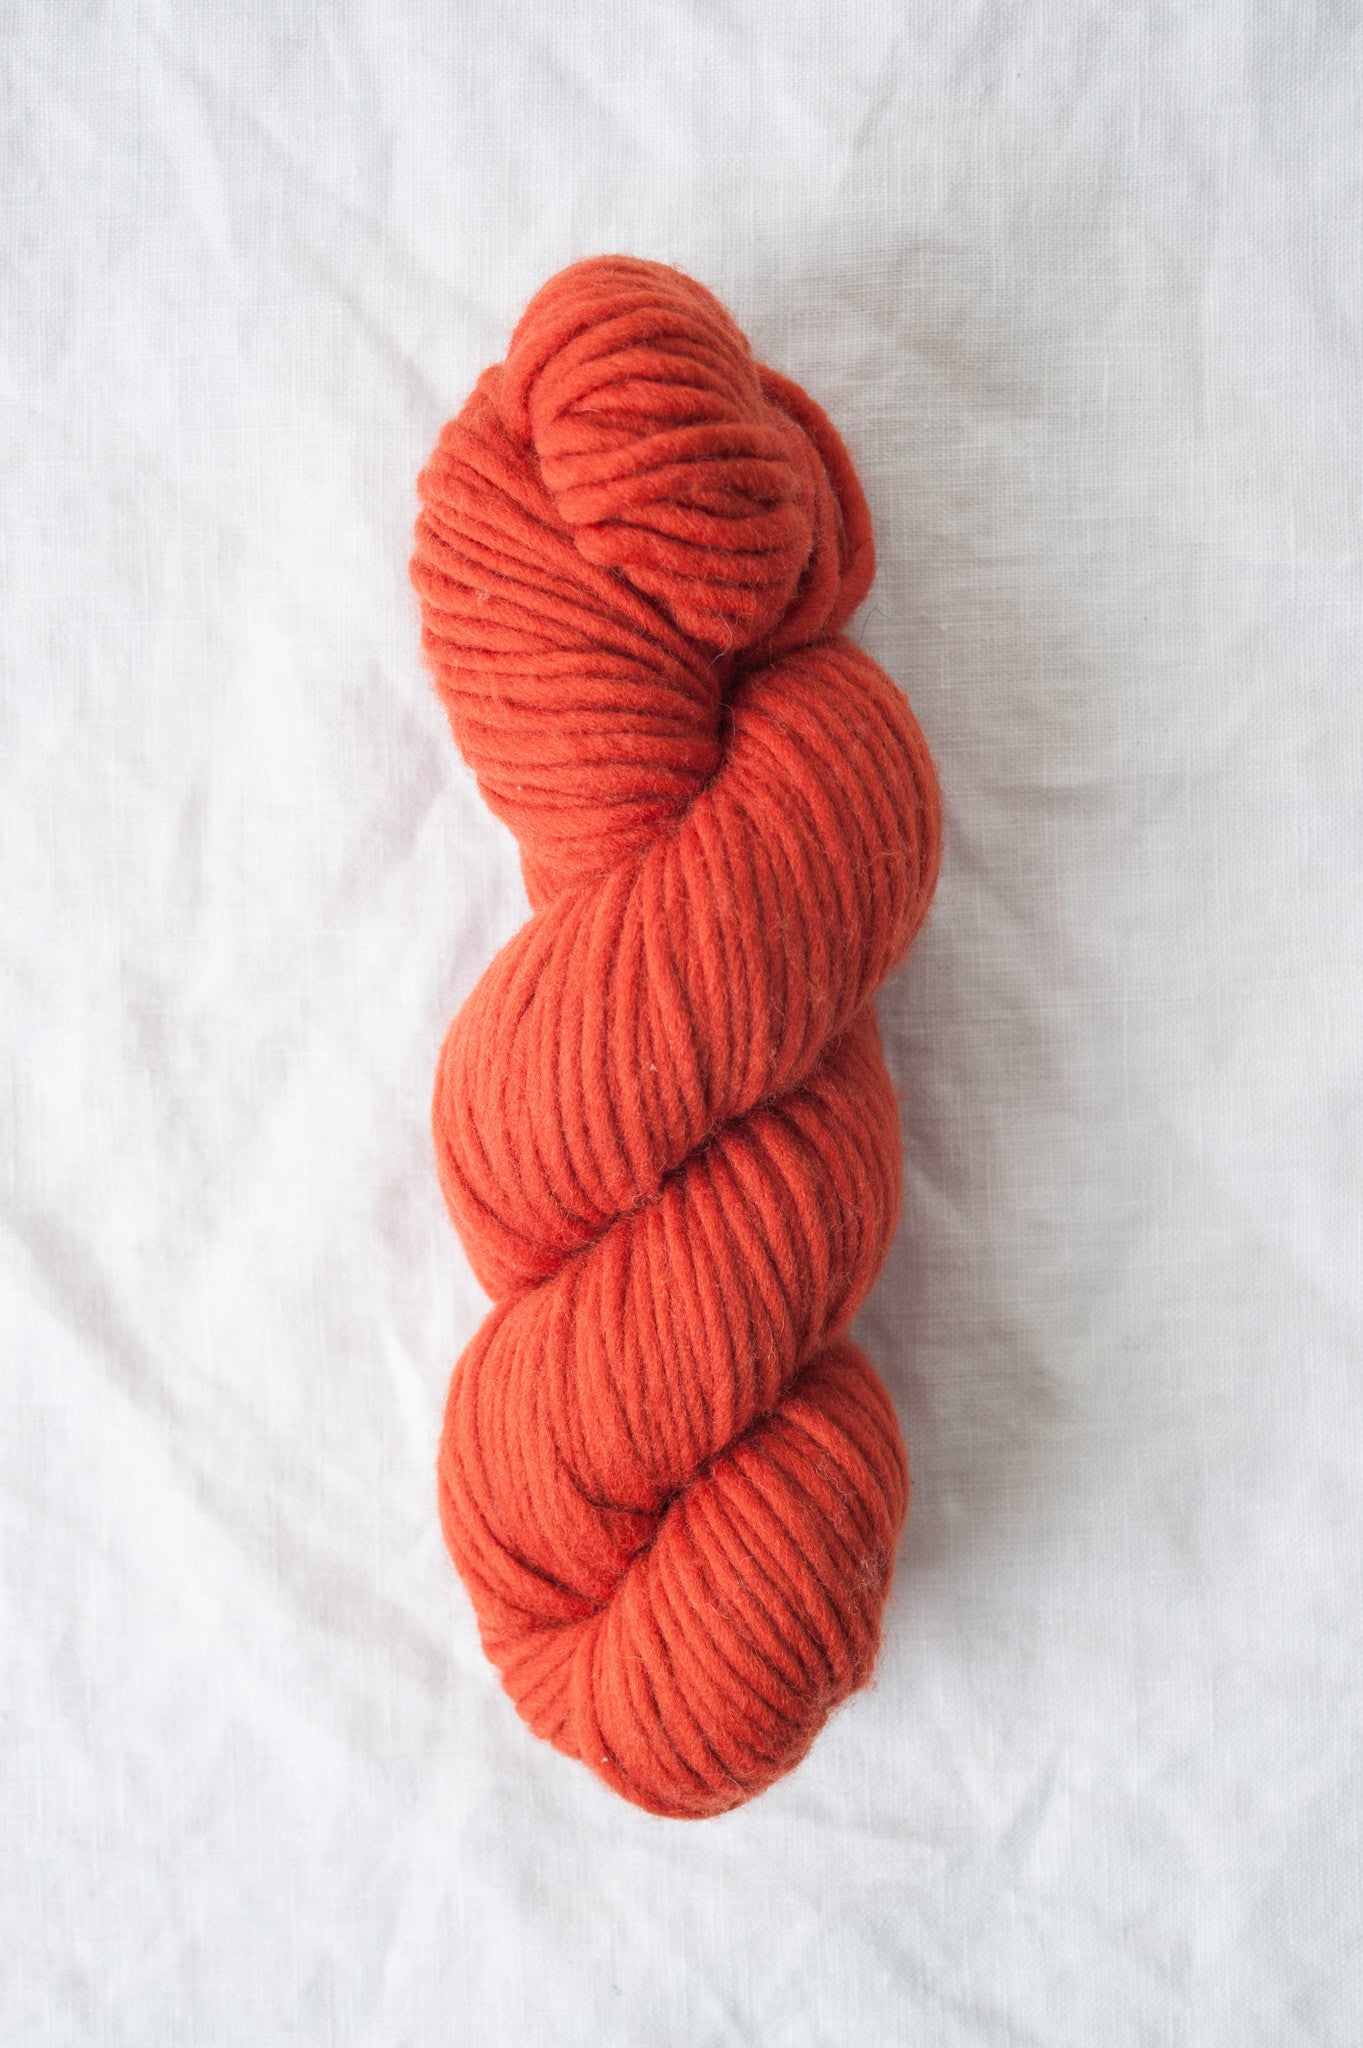 Puffin American Wool Yarn, Chunky Weight – Quince & Co.